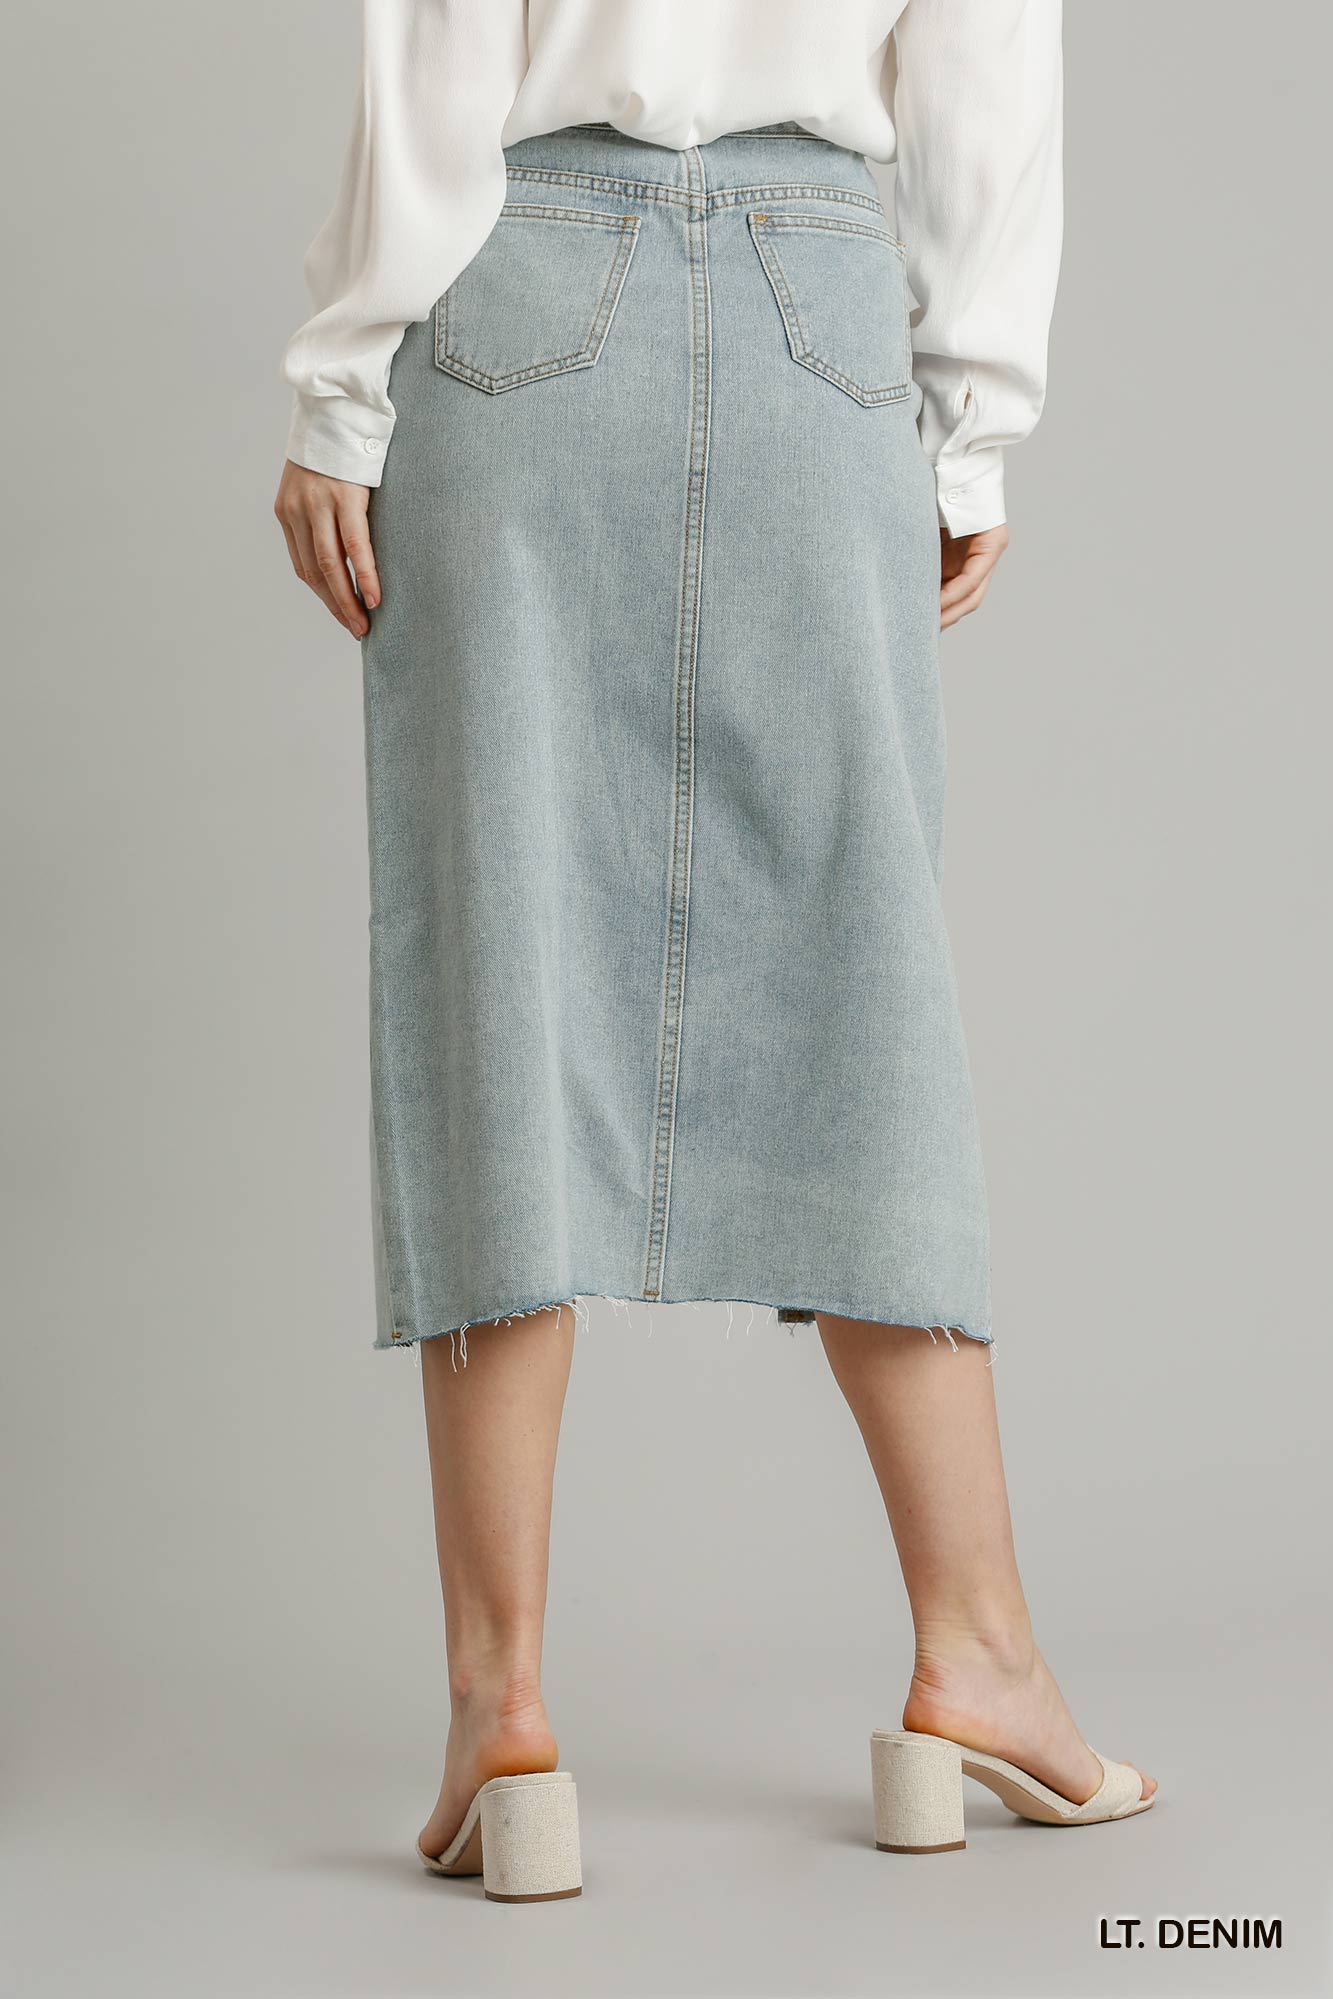 Asymmetrical Waist And Button Up Front Split Denim Skirt With Back Pockets And Unfinished Hem - Fashion Quality Boutik